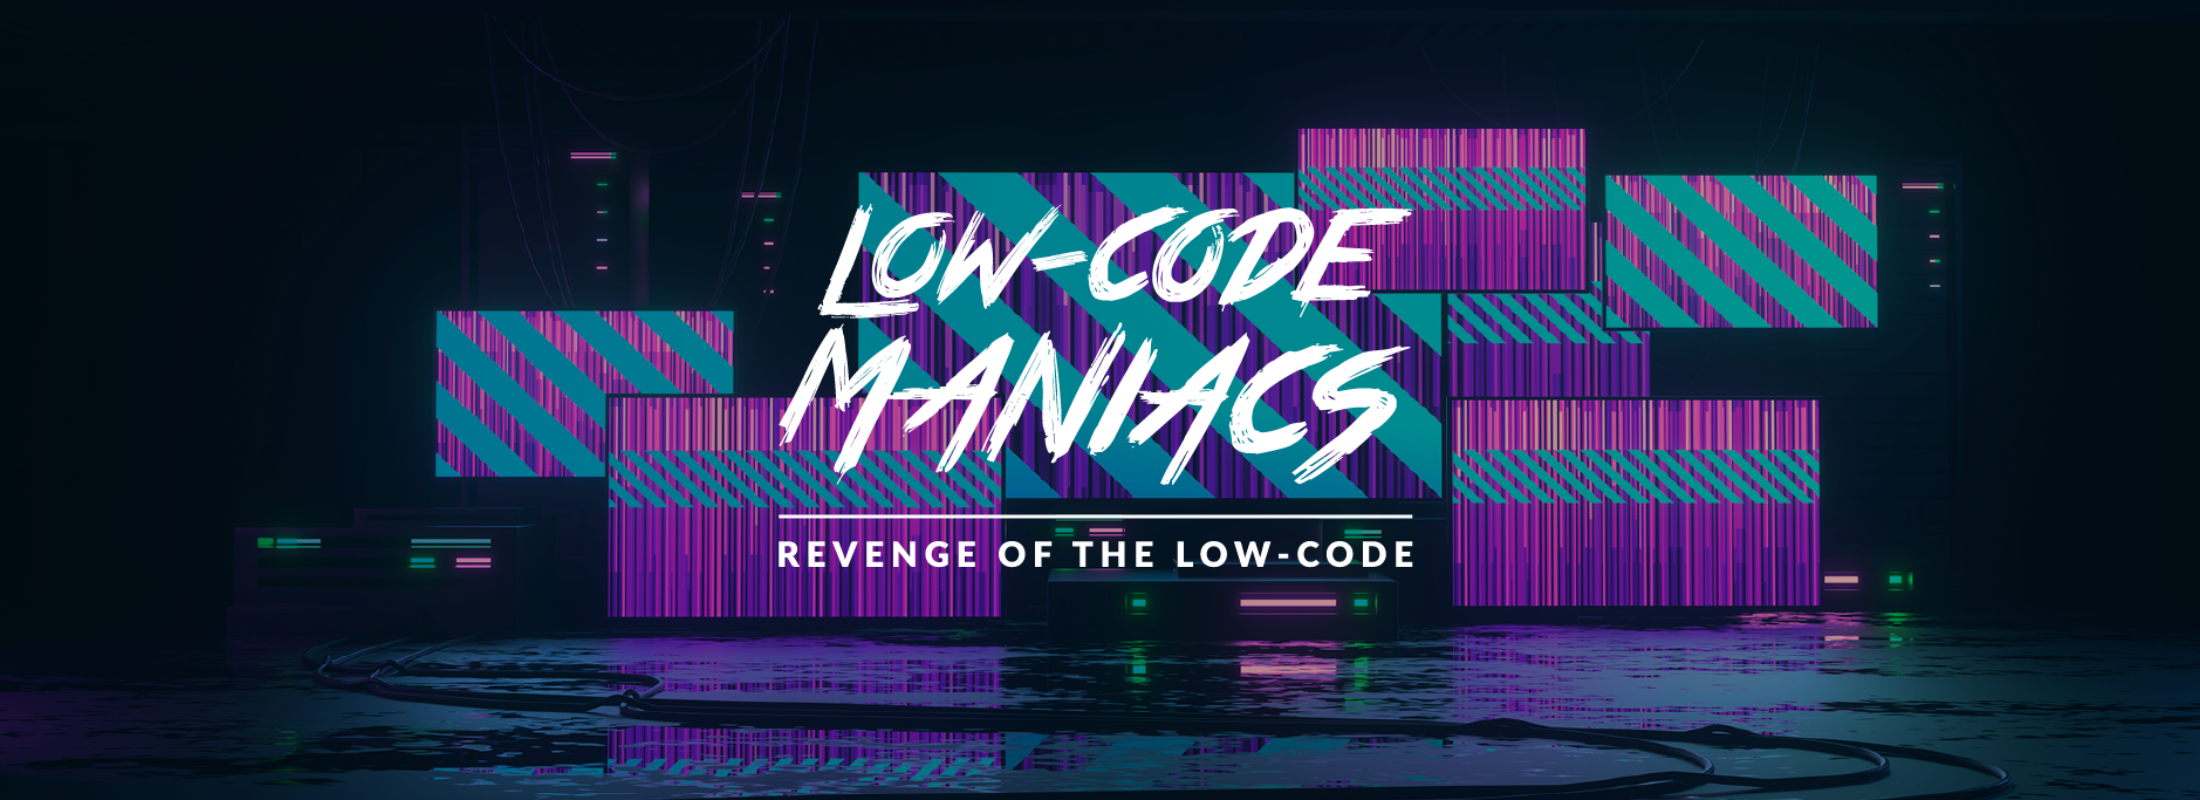 Low-Code Maniacs - Revenge of the low-code